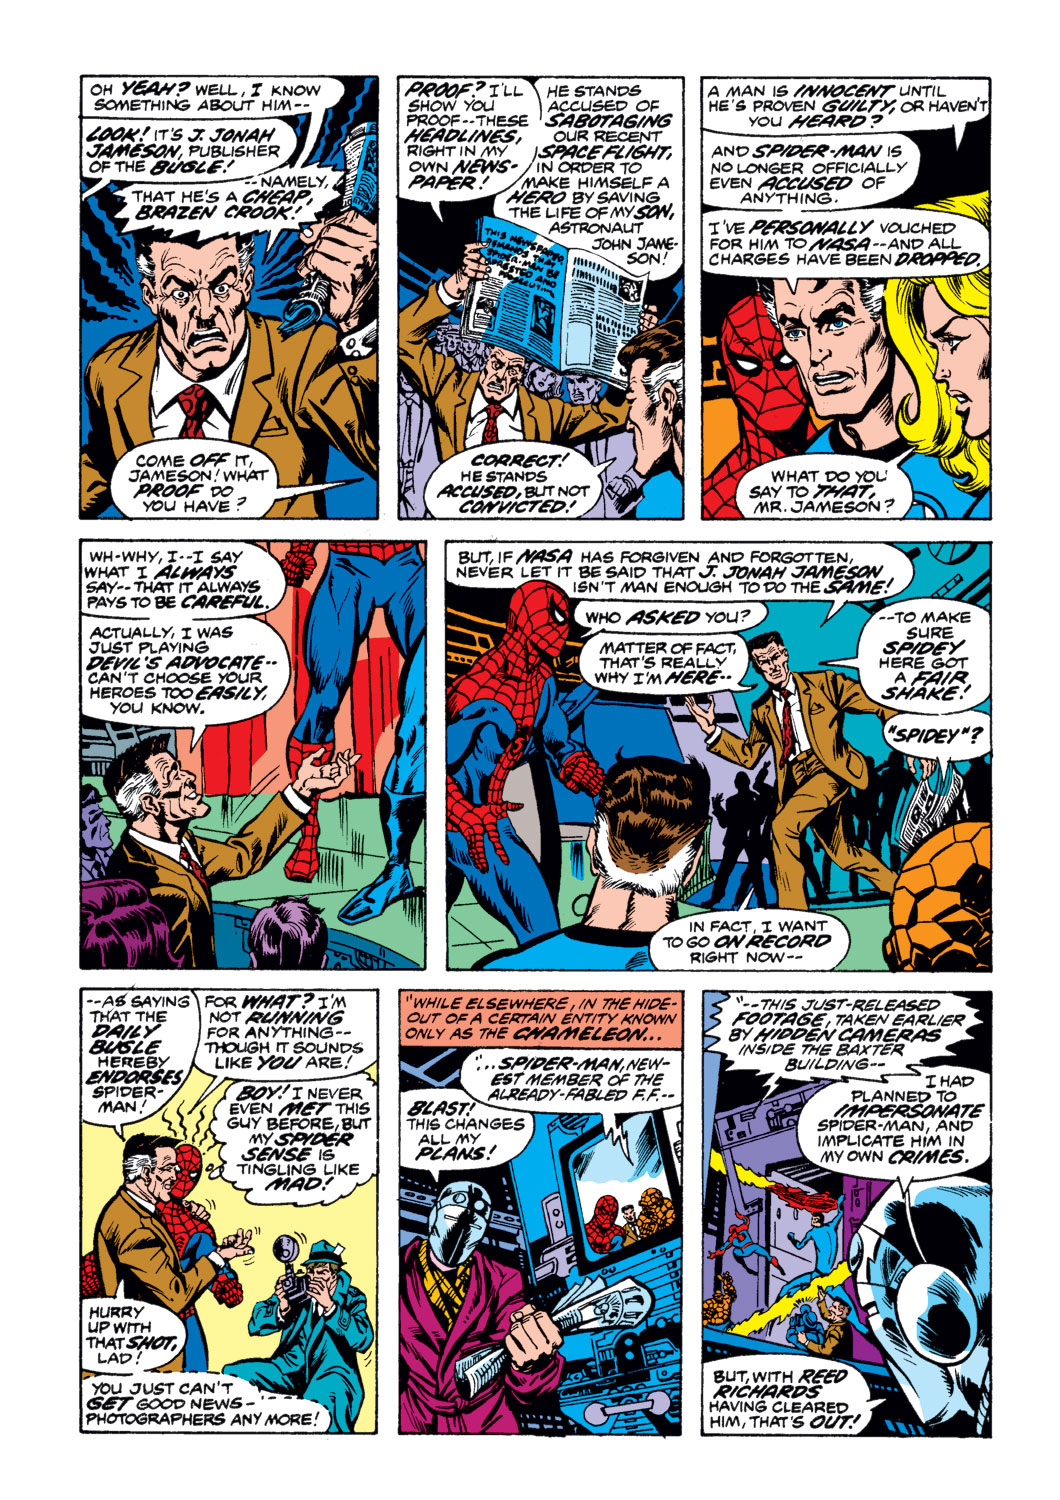 What If? (1977) issue 1 - Spider-Man joined the Fantastic Four - Page 14